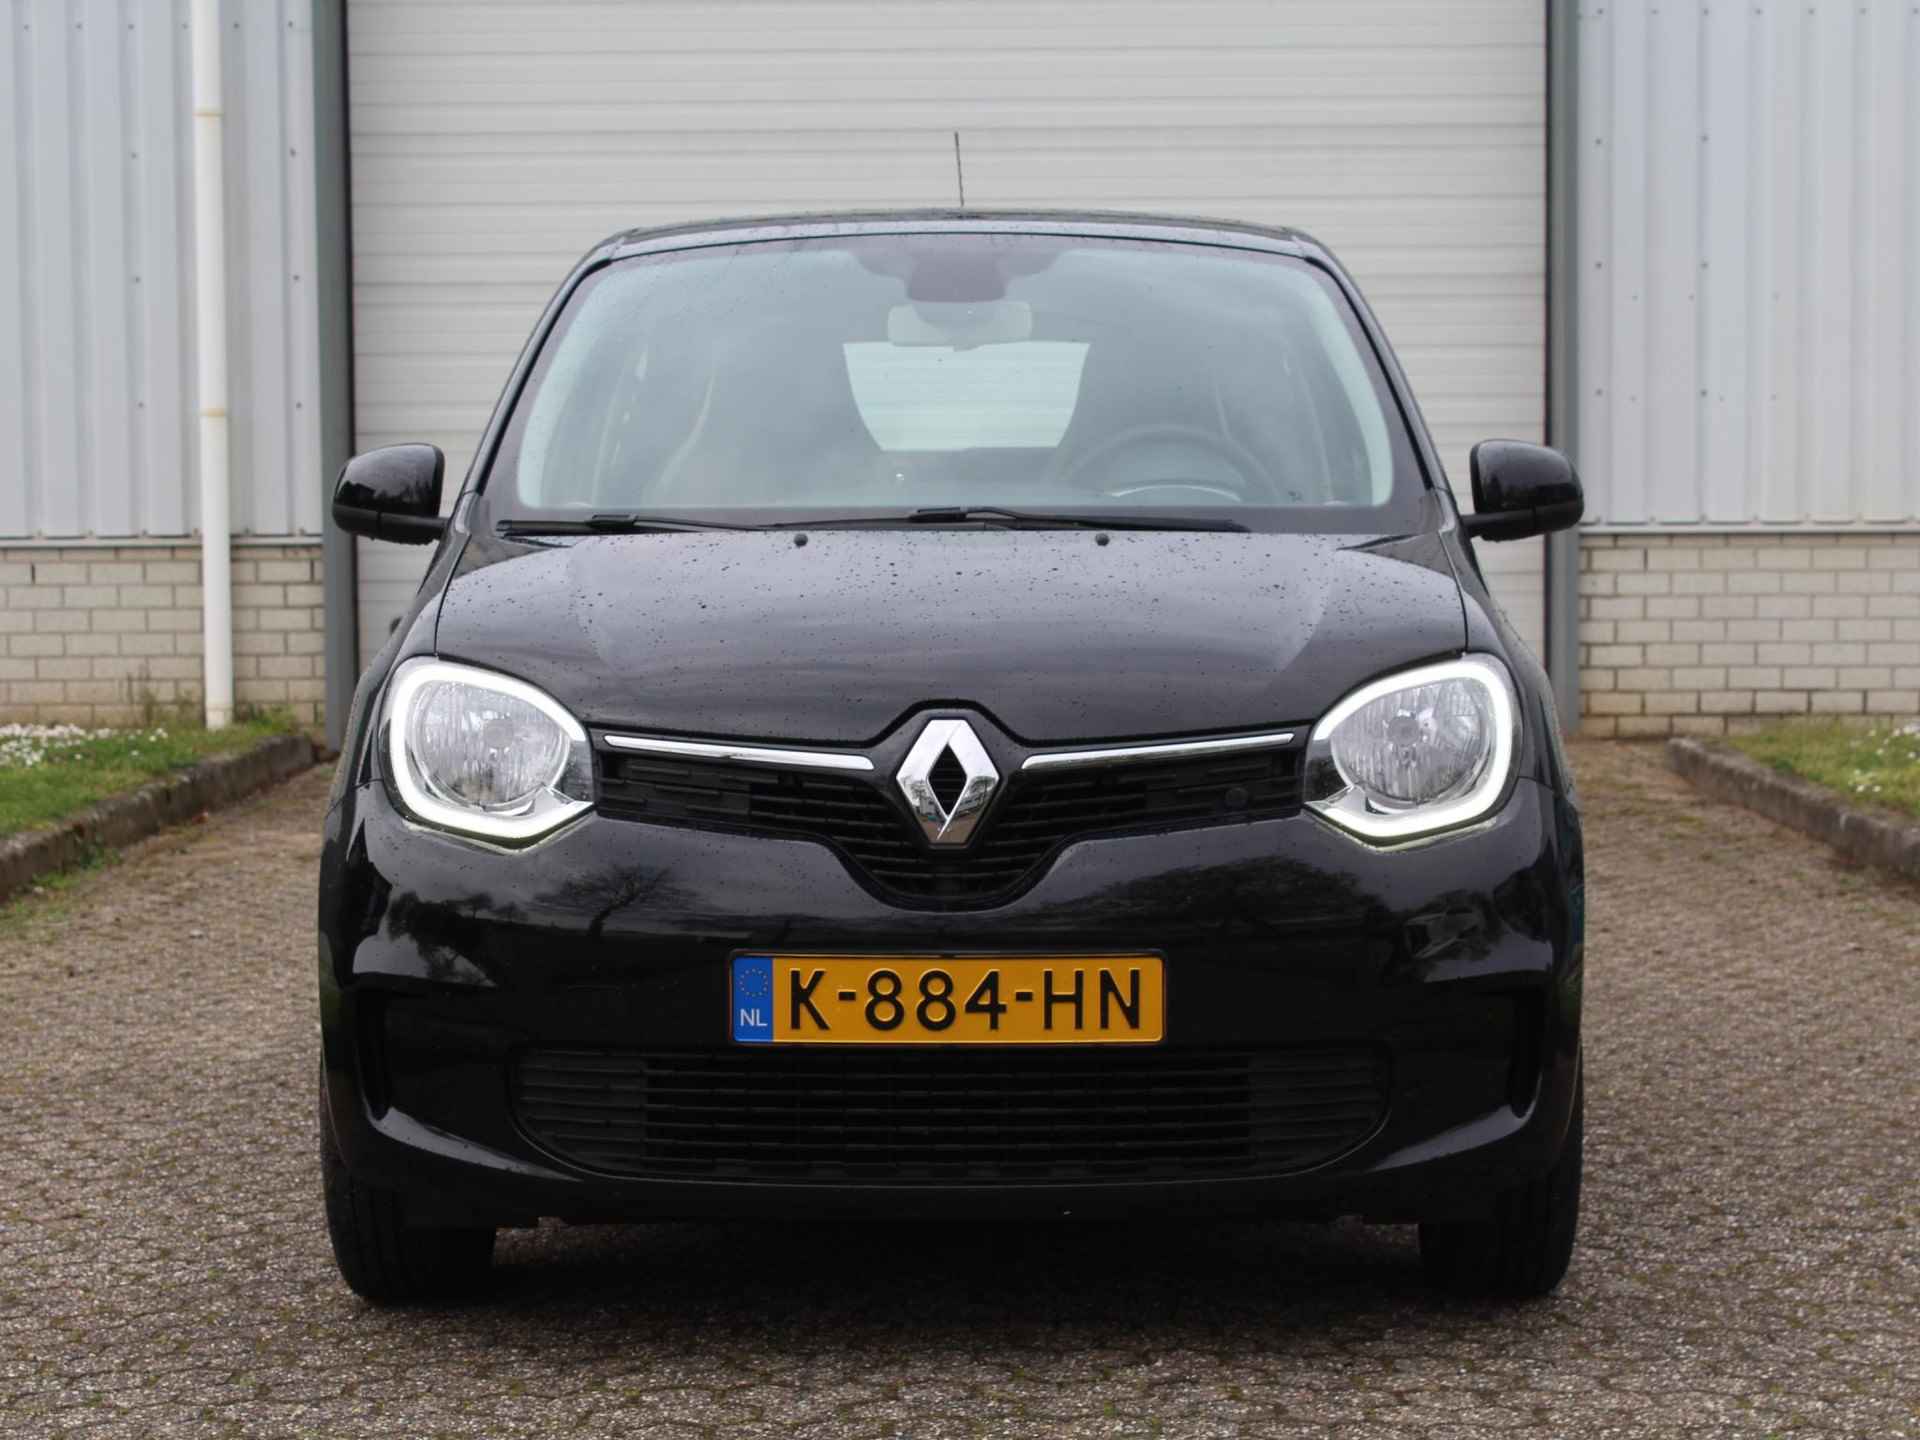 Renault Twingo Z.E. R80 Collection / SUBSIDIE  € 2000,- mogelijk / AUTOMAAT / Navigatiesysteem / Airco / Apple Car Play & Android Auto / DAB / Led dagrijverlichting / Metaalkleur / Cruise control - 31/47